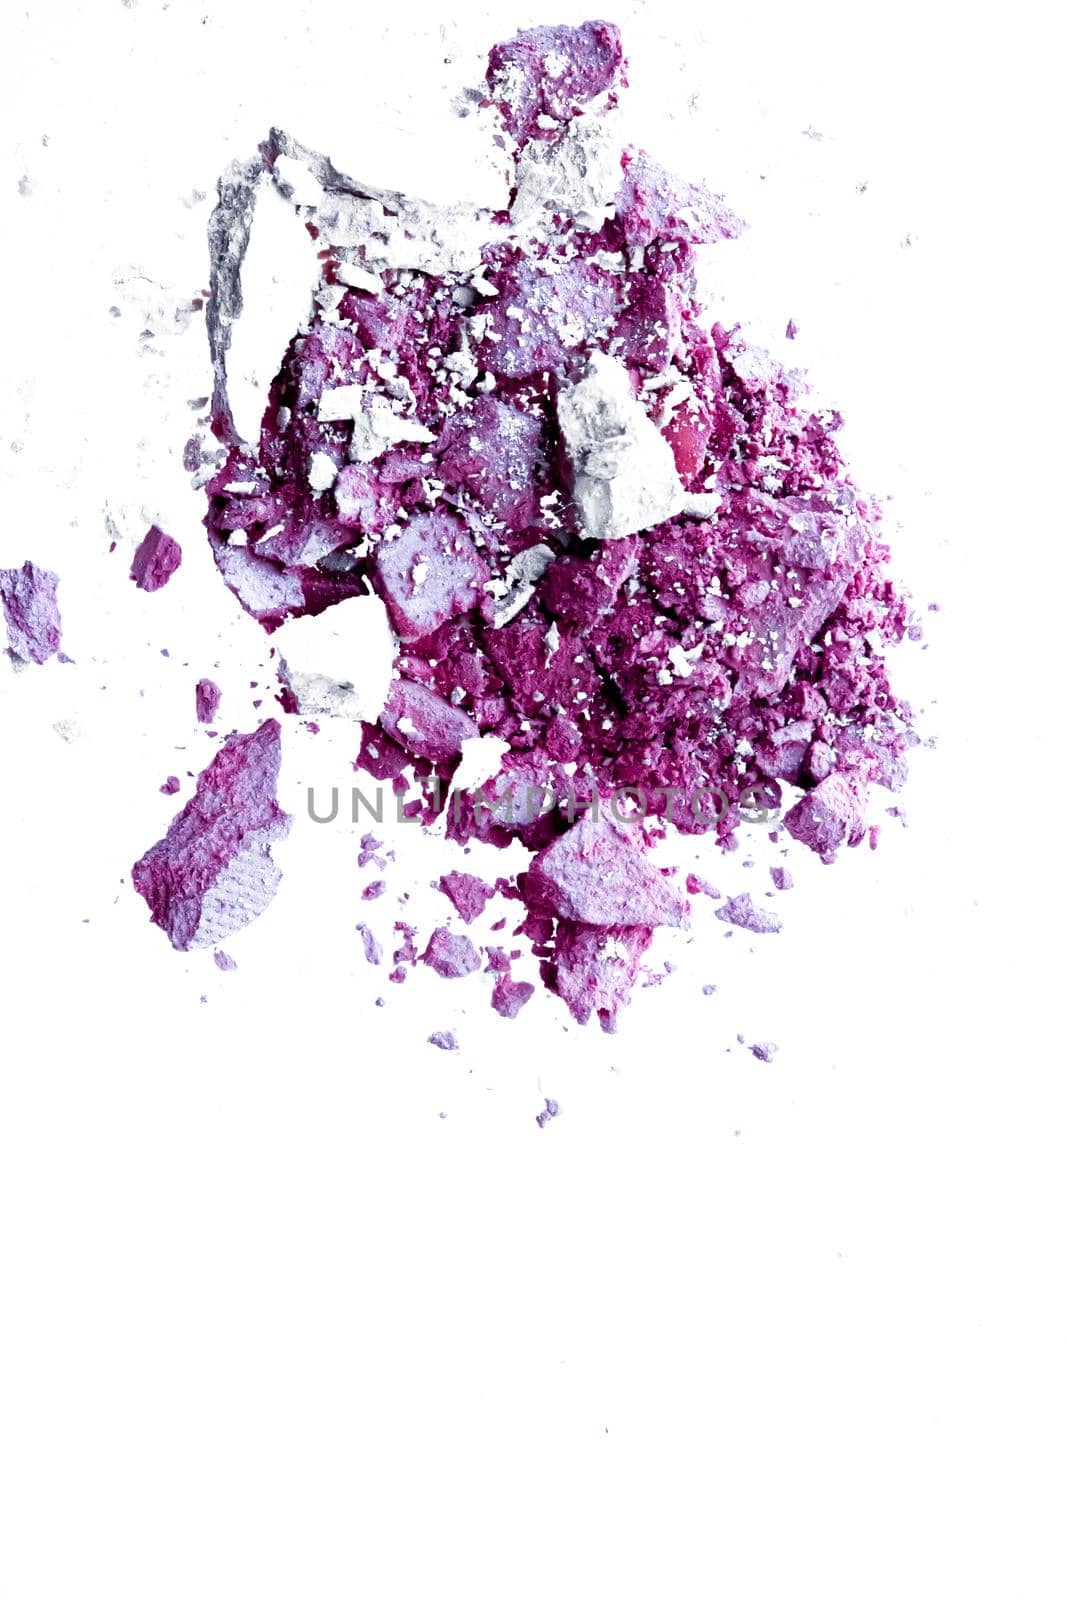 Powder cosmetics, mineral organic eyeshadow, blush or crushed cosmetic product isolated on white background, makeup and beauty banner, flatlay design.